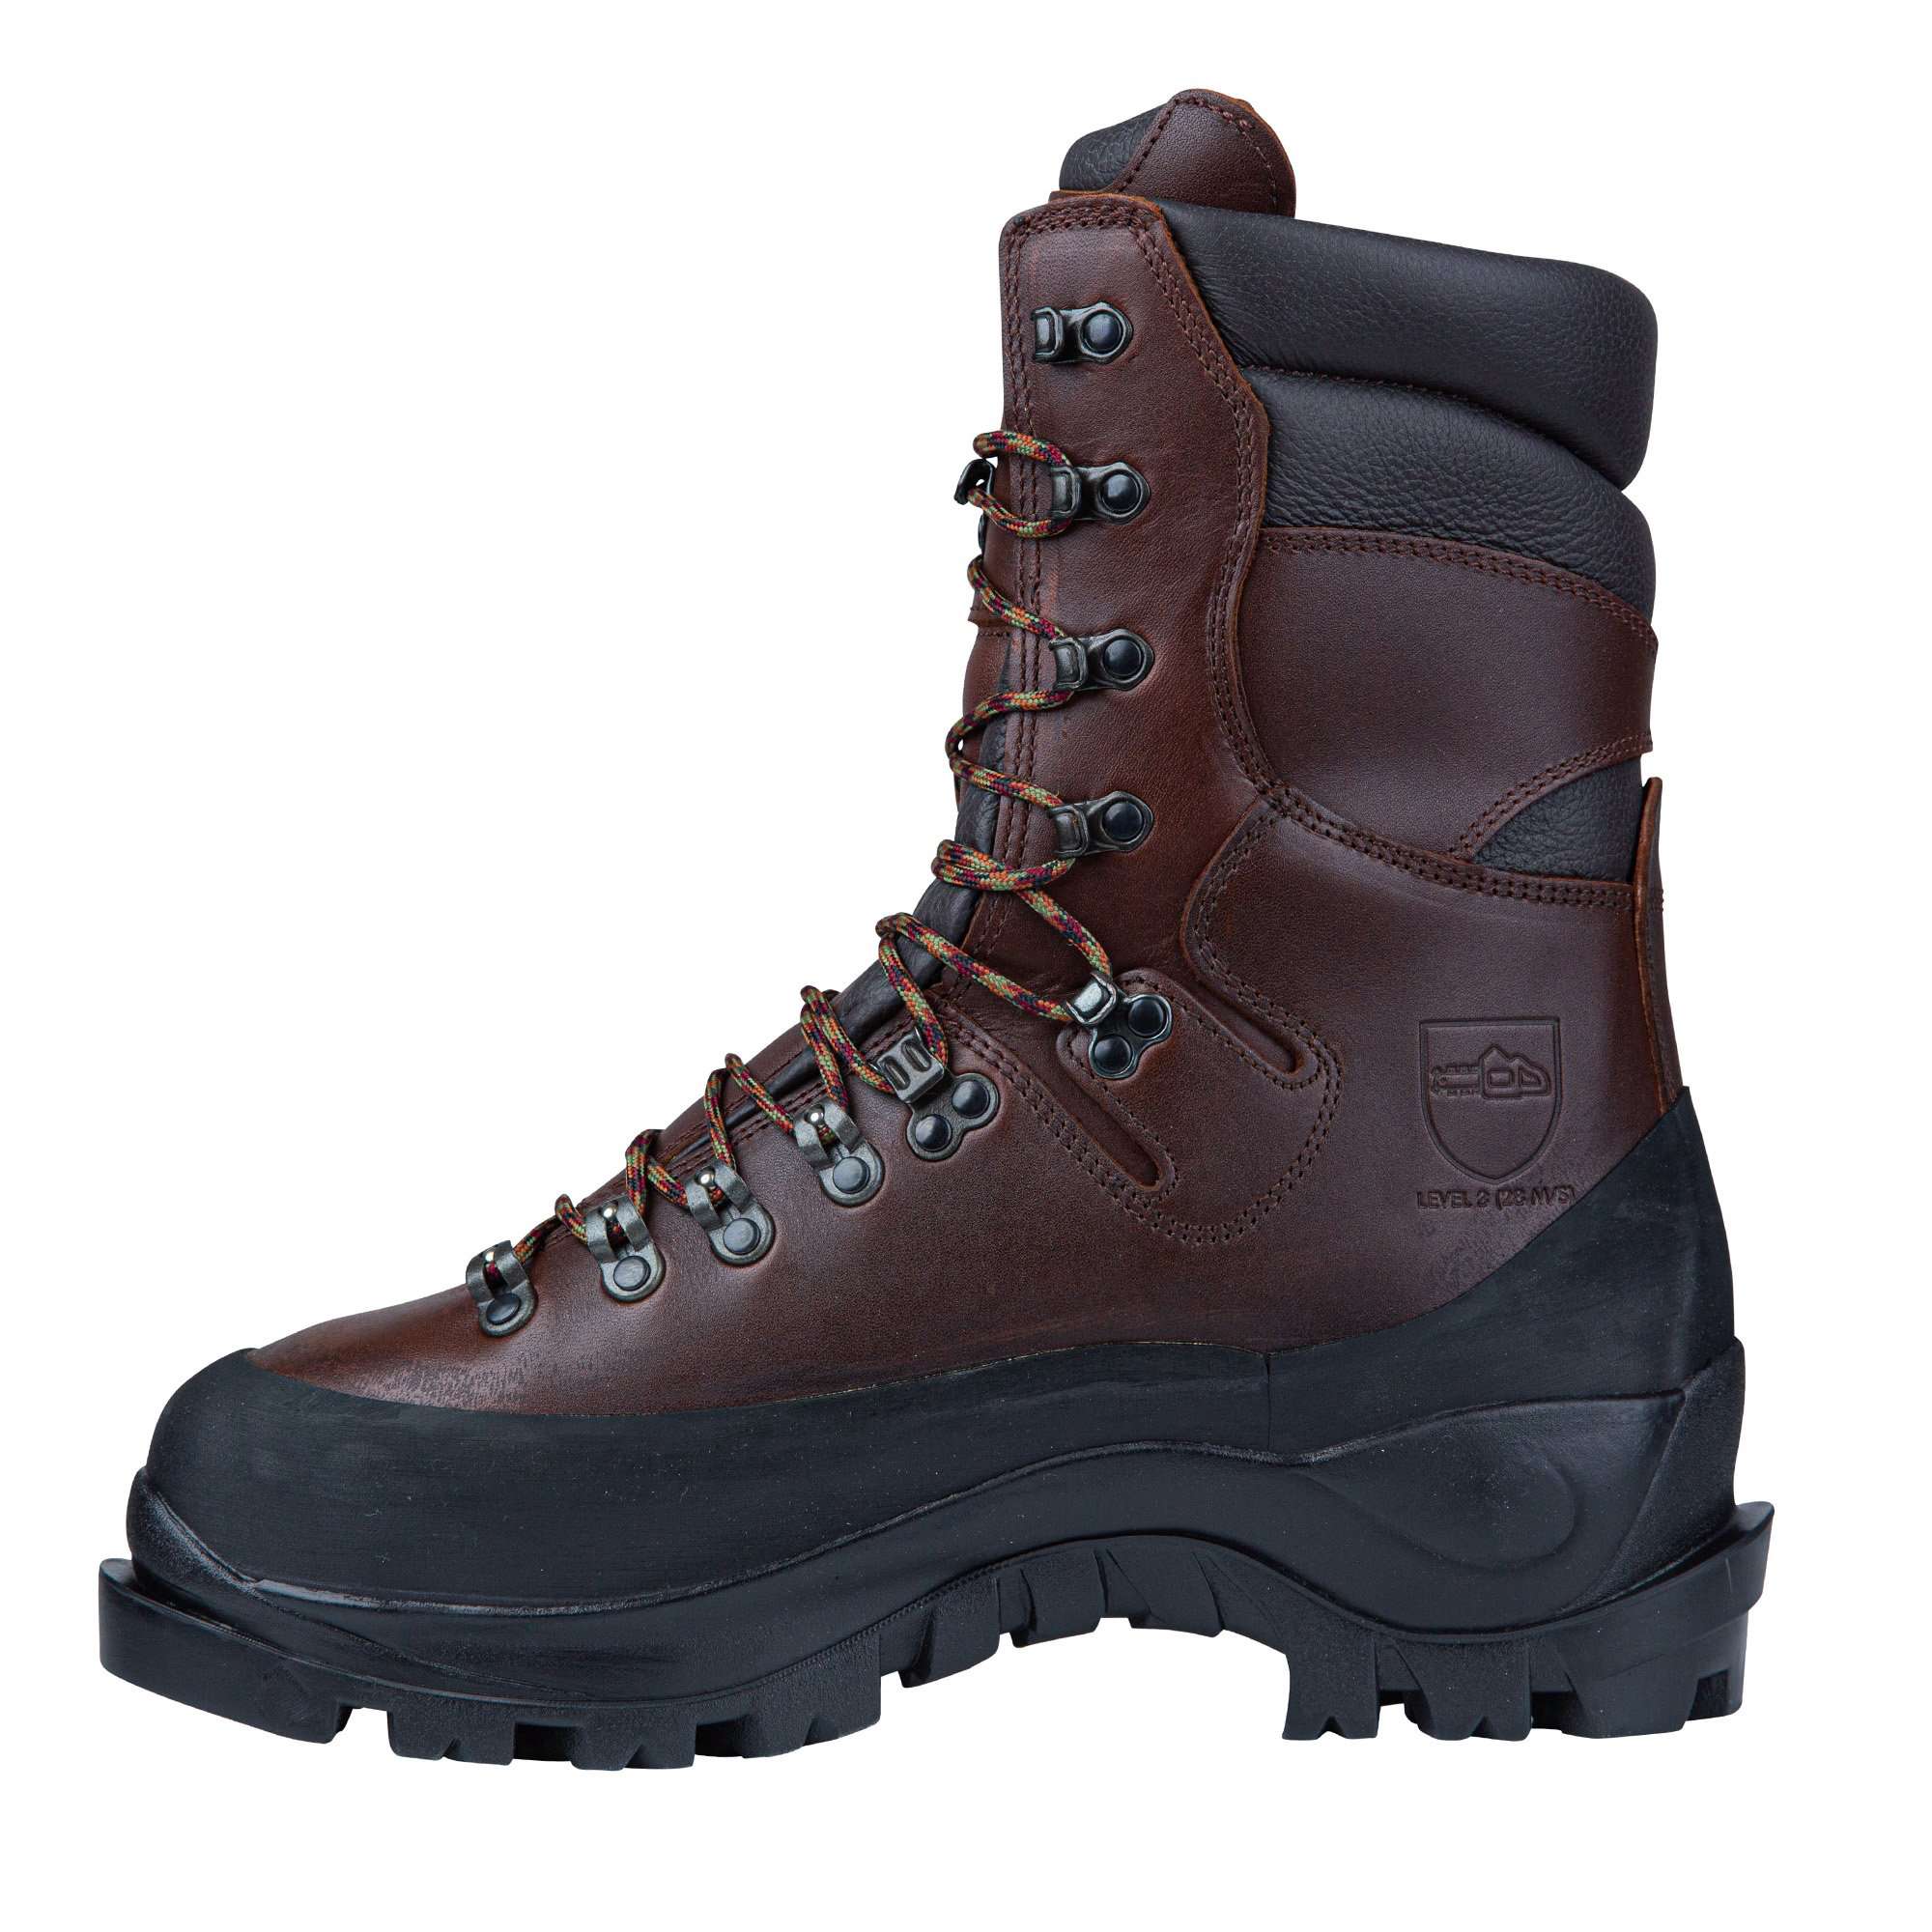 Fellhunter Expert Class 3 Chainsaw Boot - AT36500 - Arbortec Forestwear